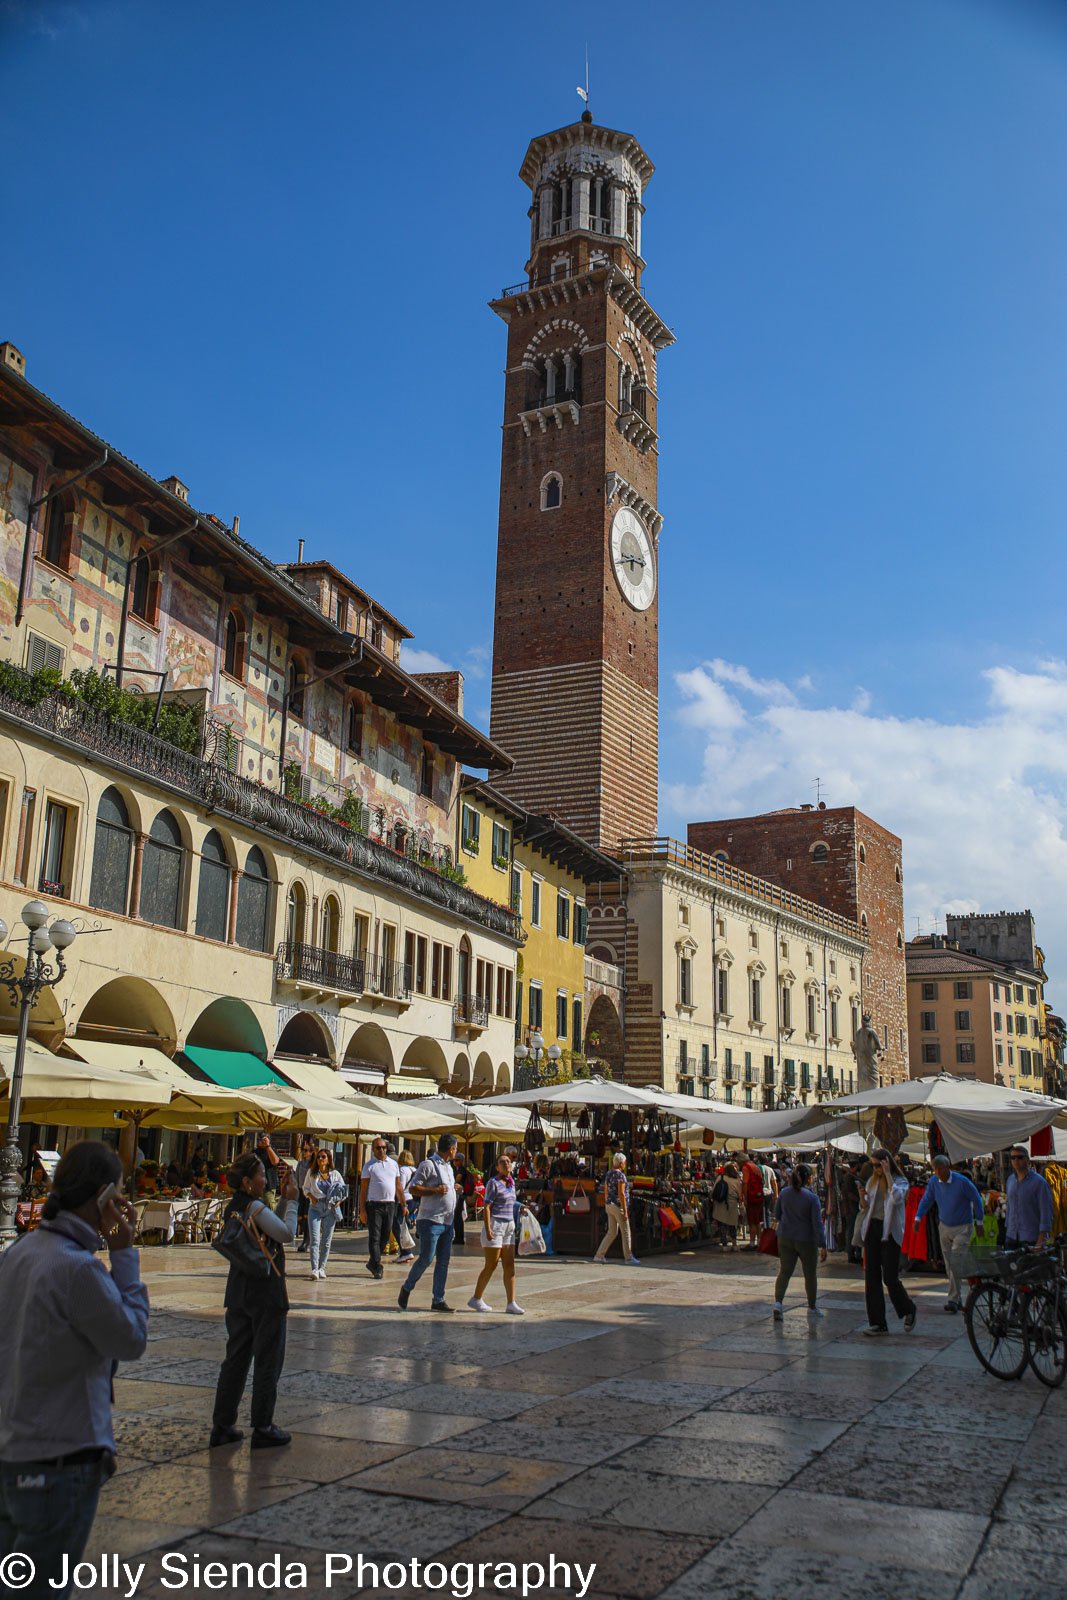 Verona market square with campanella tower and open air market